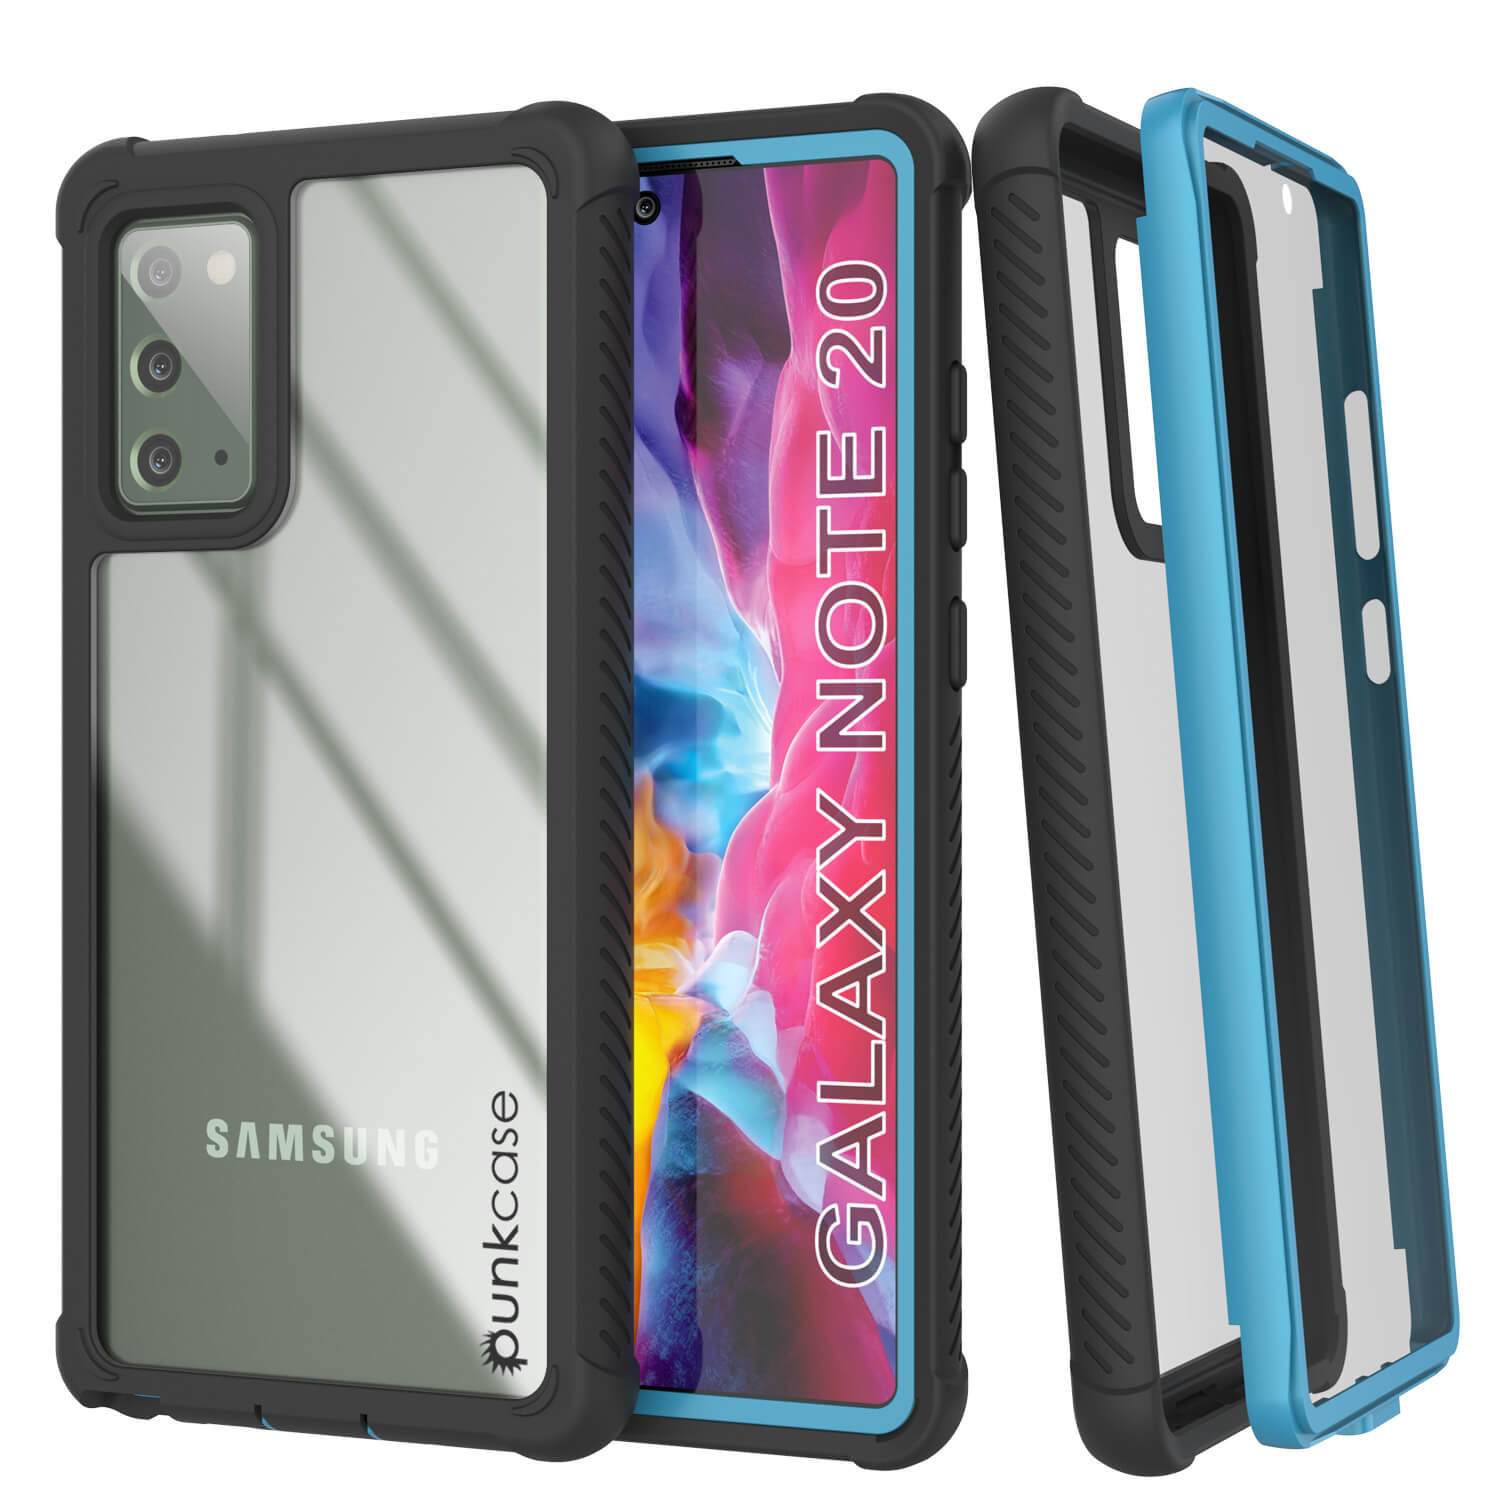 Punkcase Galaxy Note 20 Case, [Spartan Series] Light Blue Rugged Heavy Duty Cover W/Built in Screen Protector